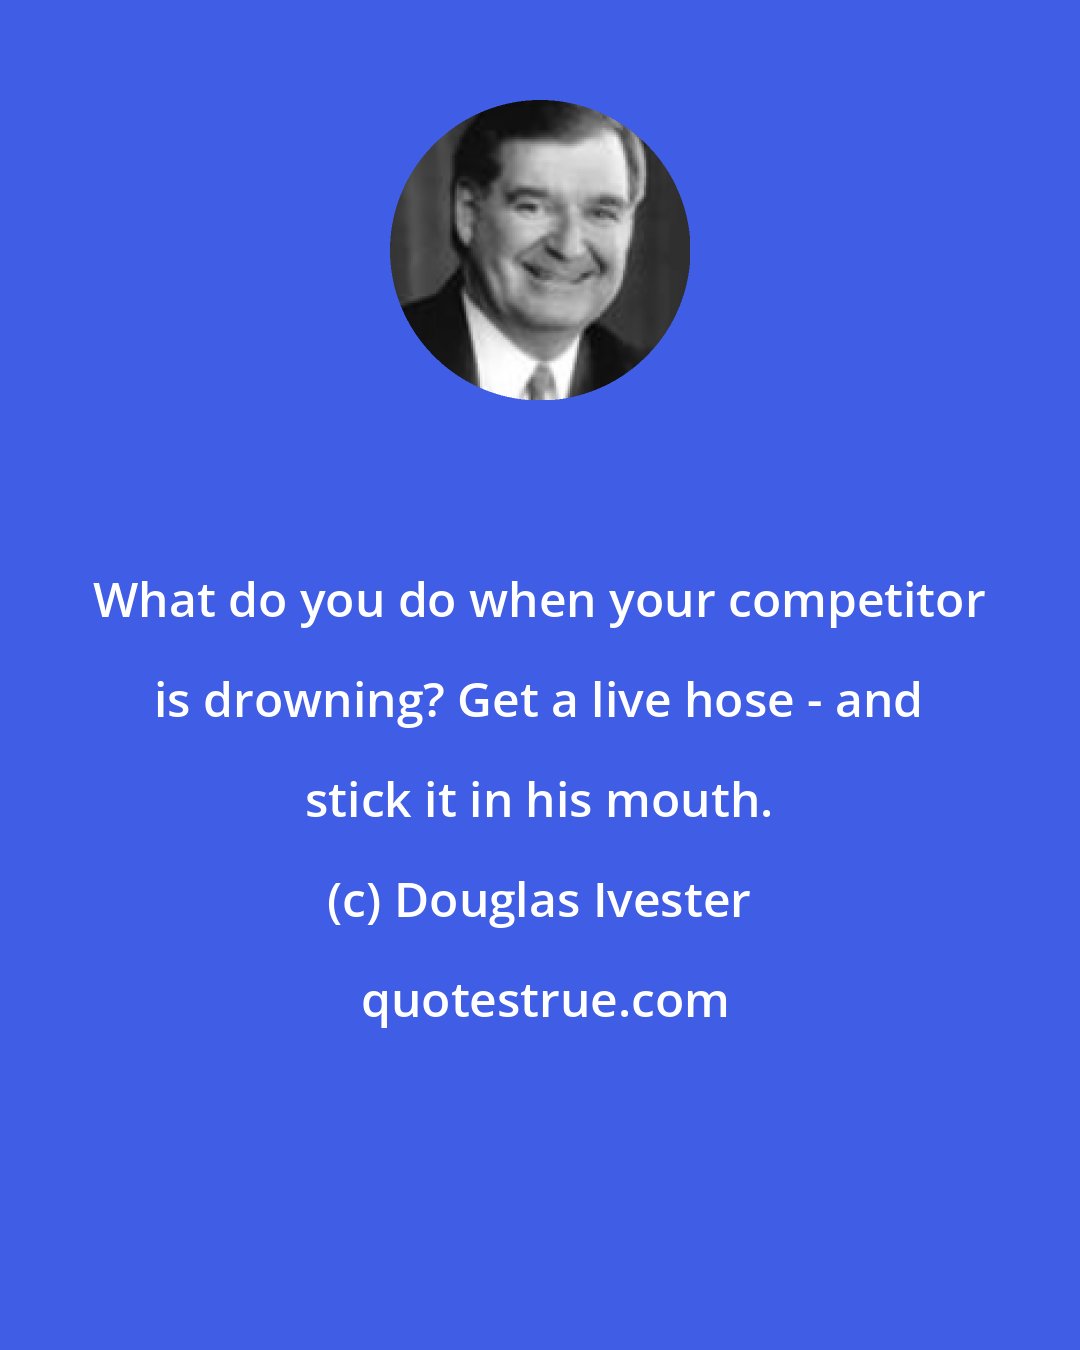 Douglas Ivester: What do you do when your competitor is drowning? Get a live hose - and stick it in his mouth.